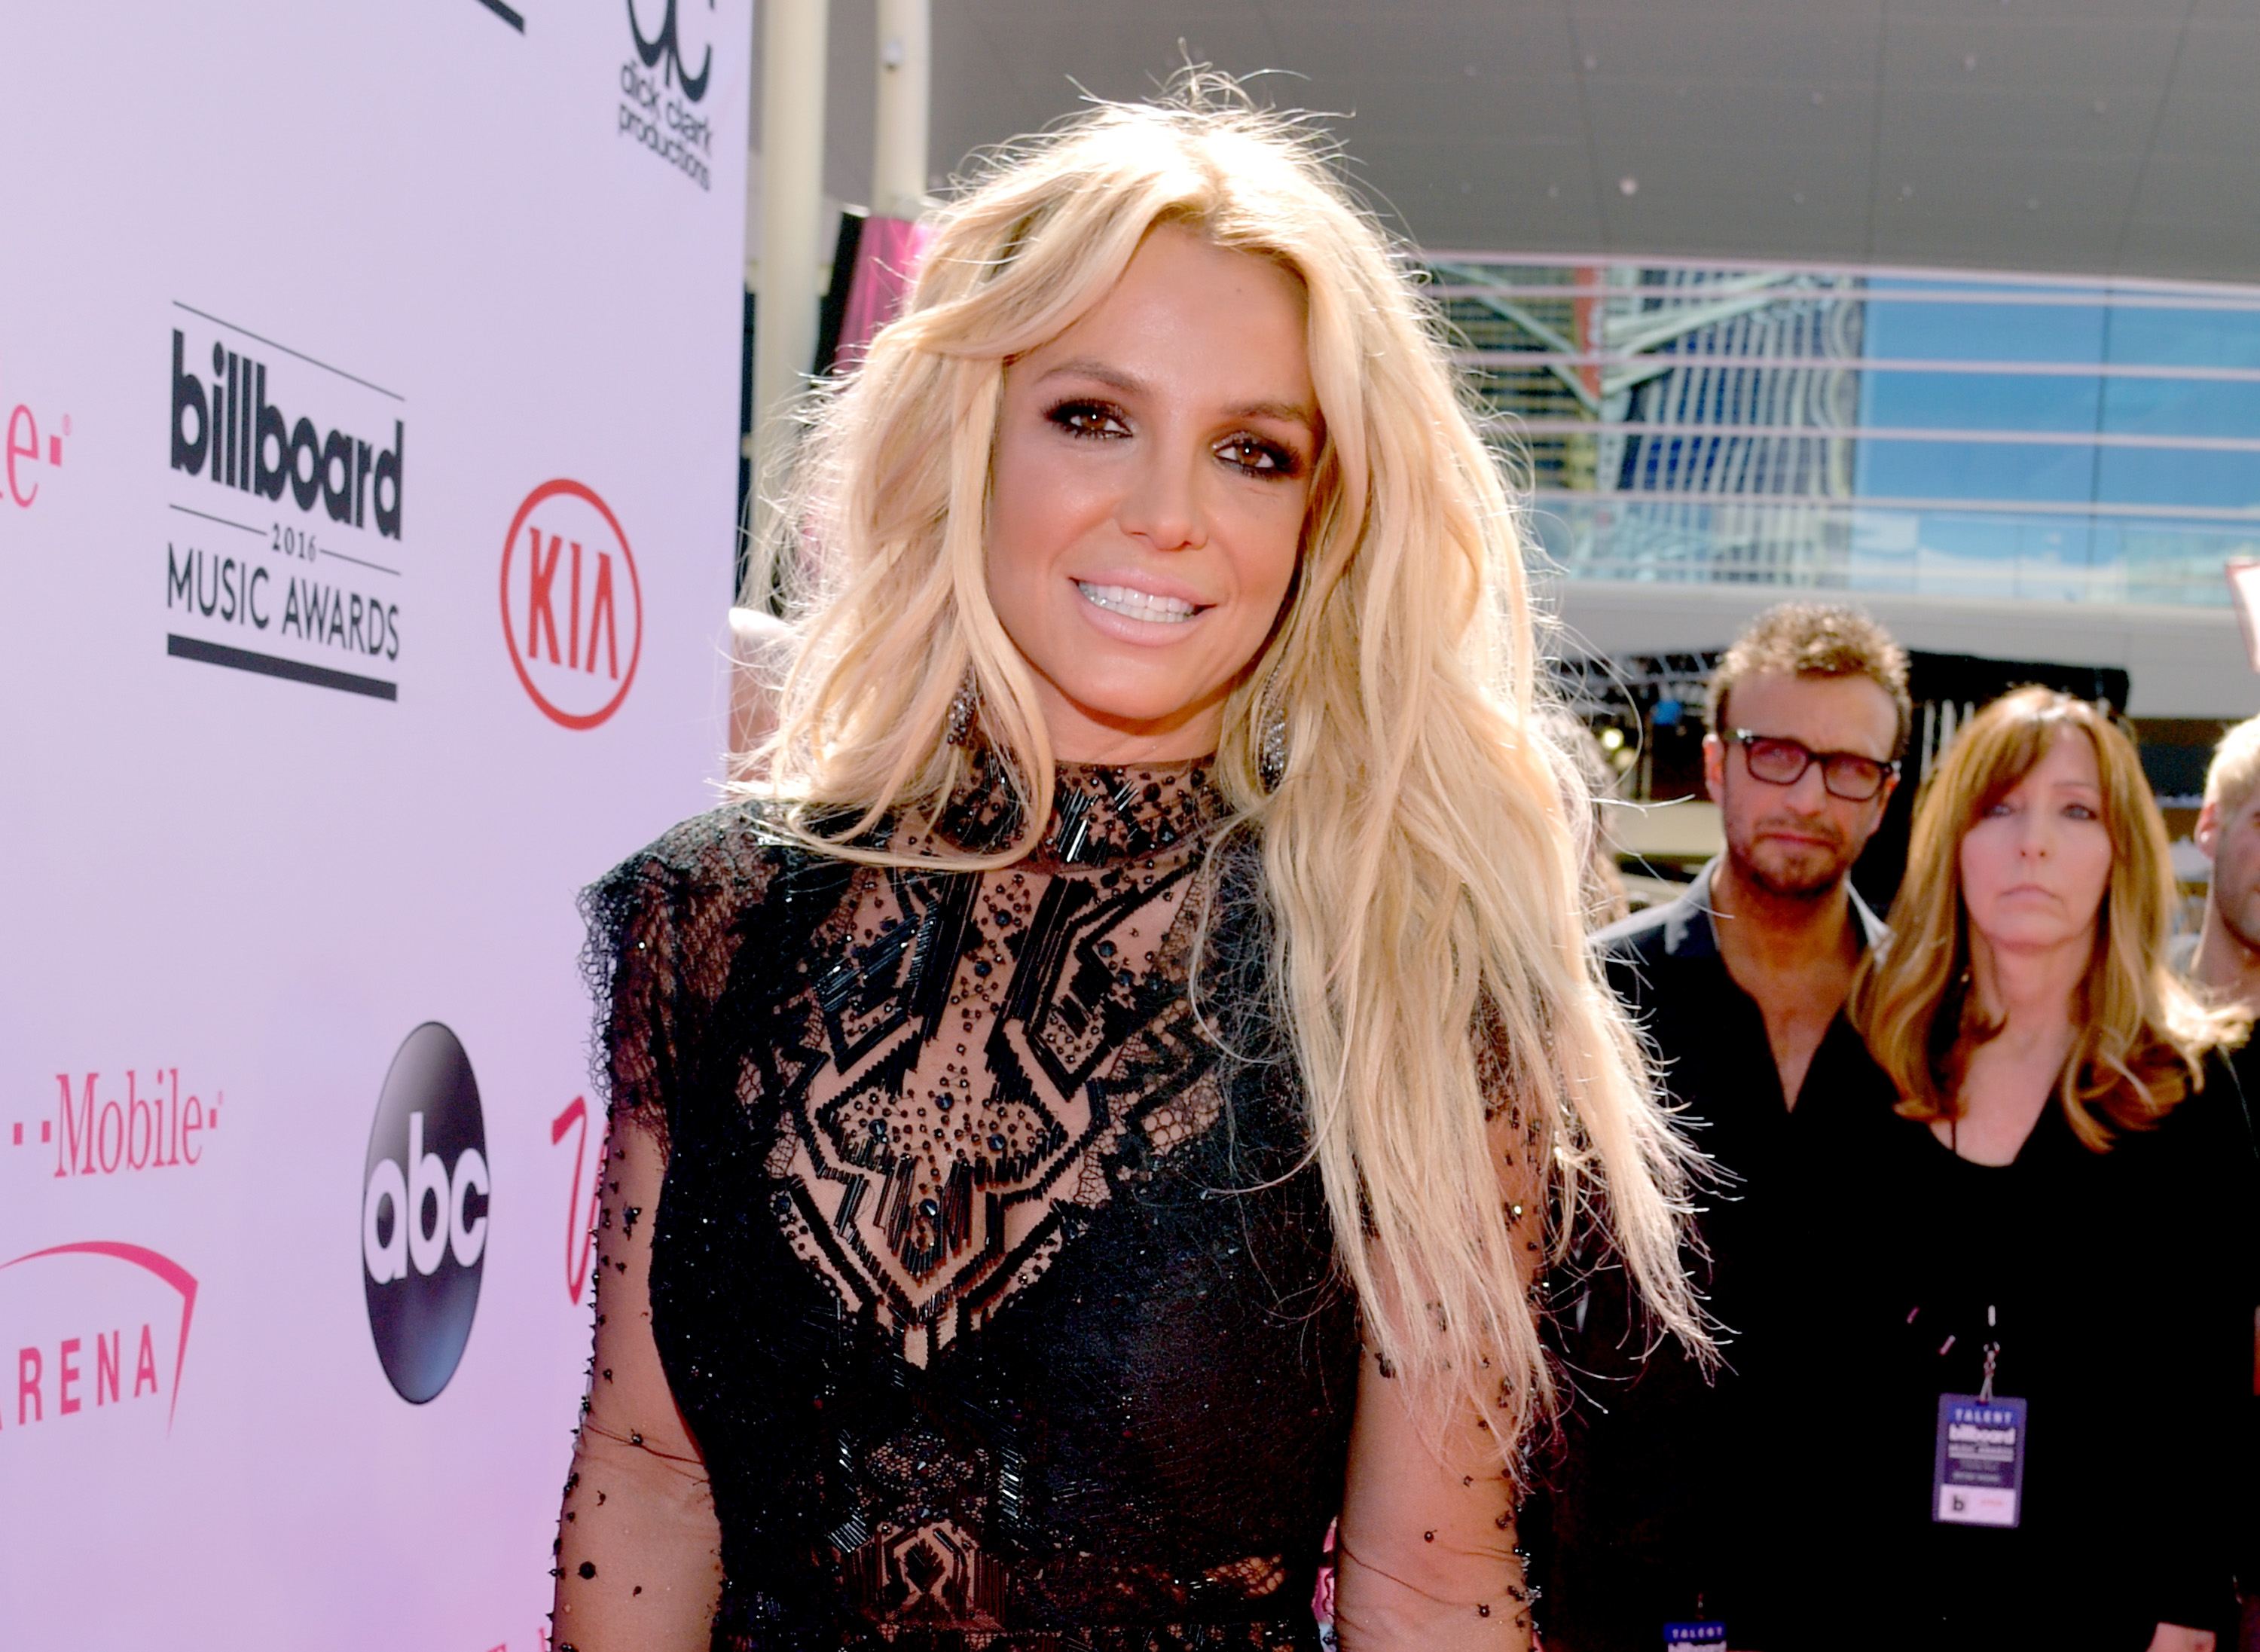 Britney Spears Hints at Never Performing Again in Instagram Post